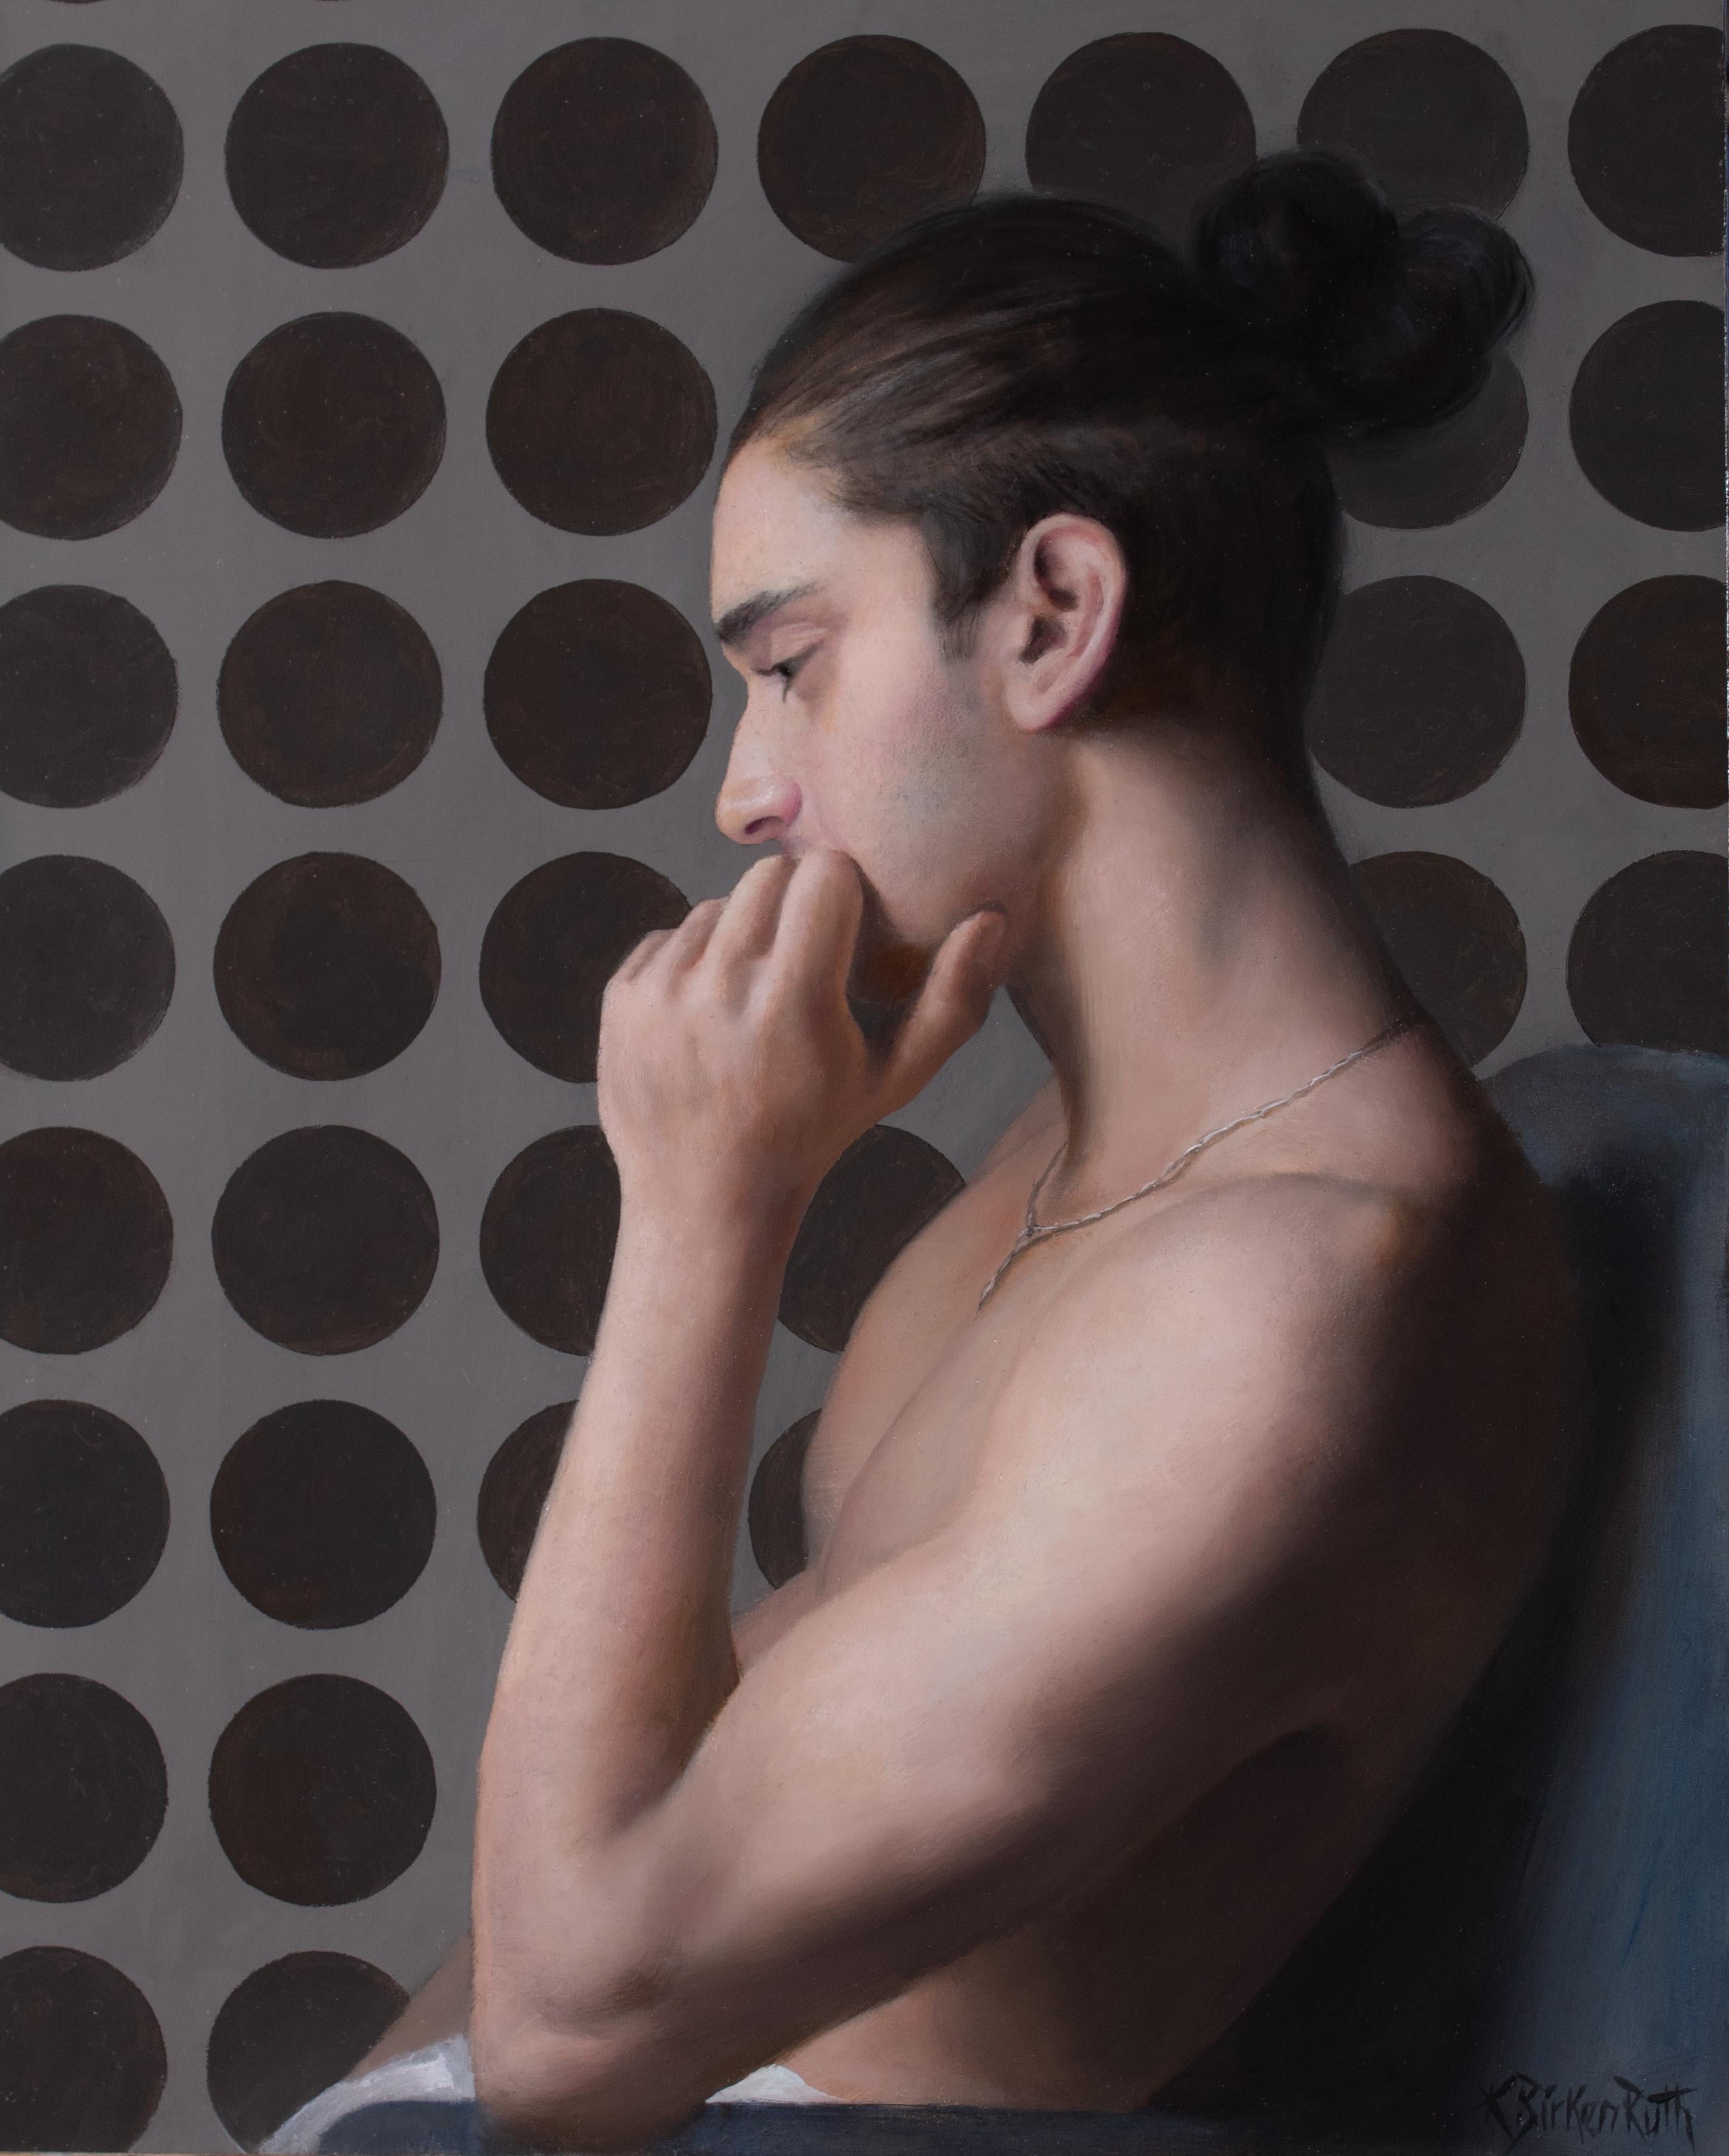 Kelly Birkenruth's "Decisions" (2023) is an original oil painting on panel, measuring 14 x 11 x 2 inches. This striking piece portrays a young man in deep contemplation, with his head resting on his hand. The background features a pattern of dark